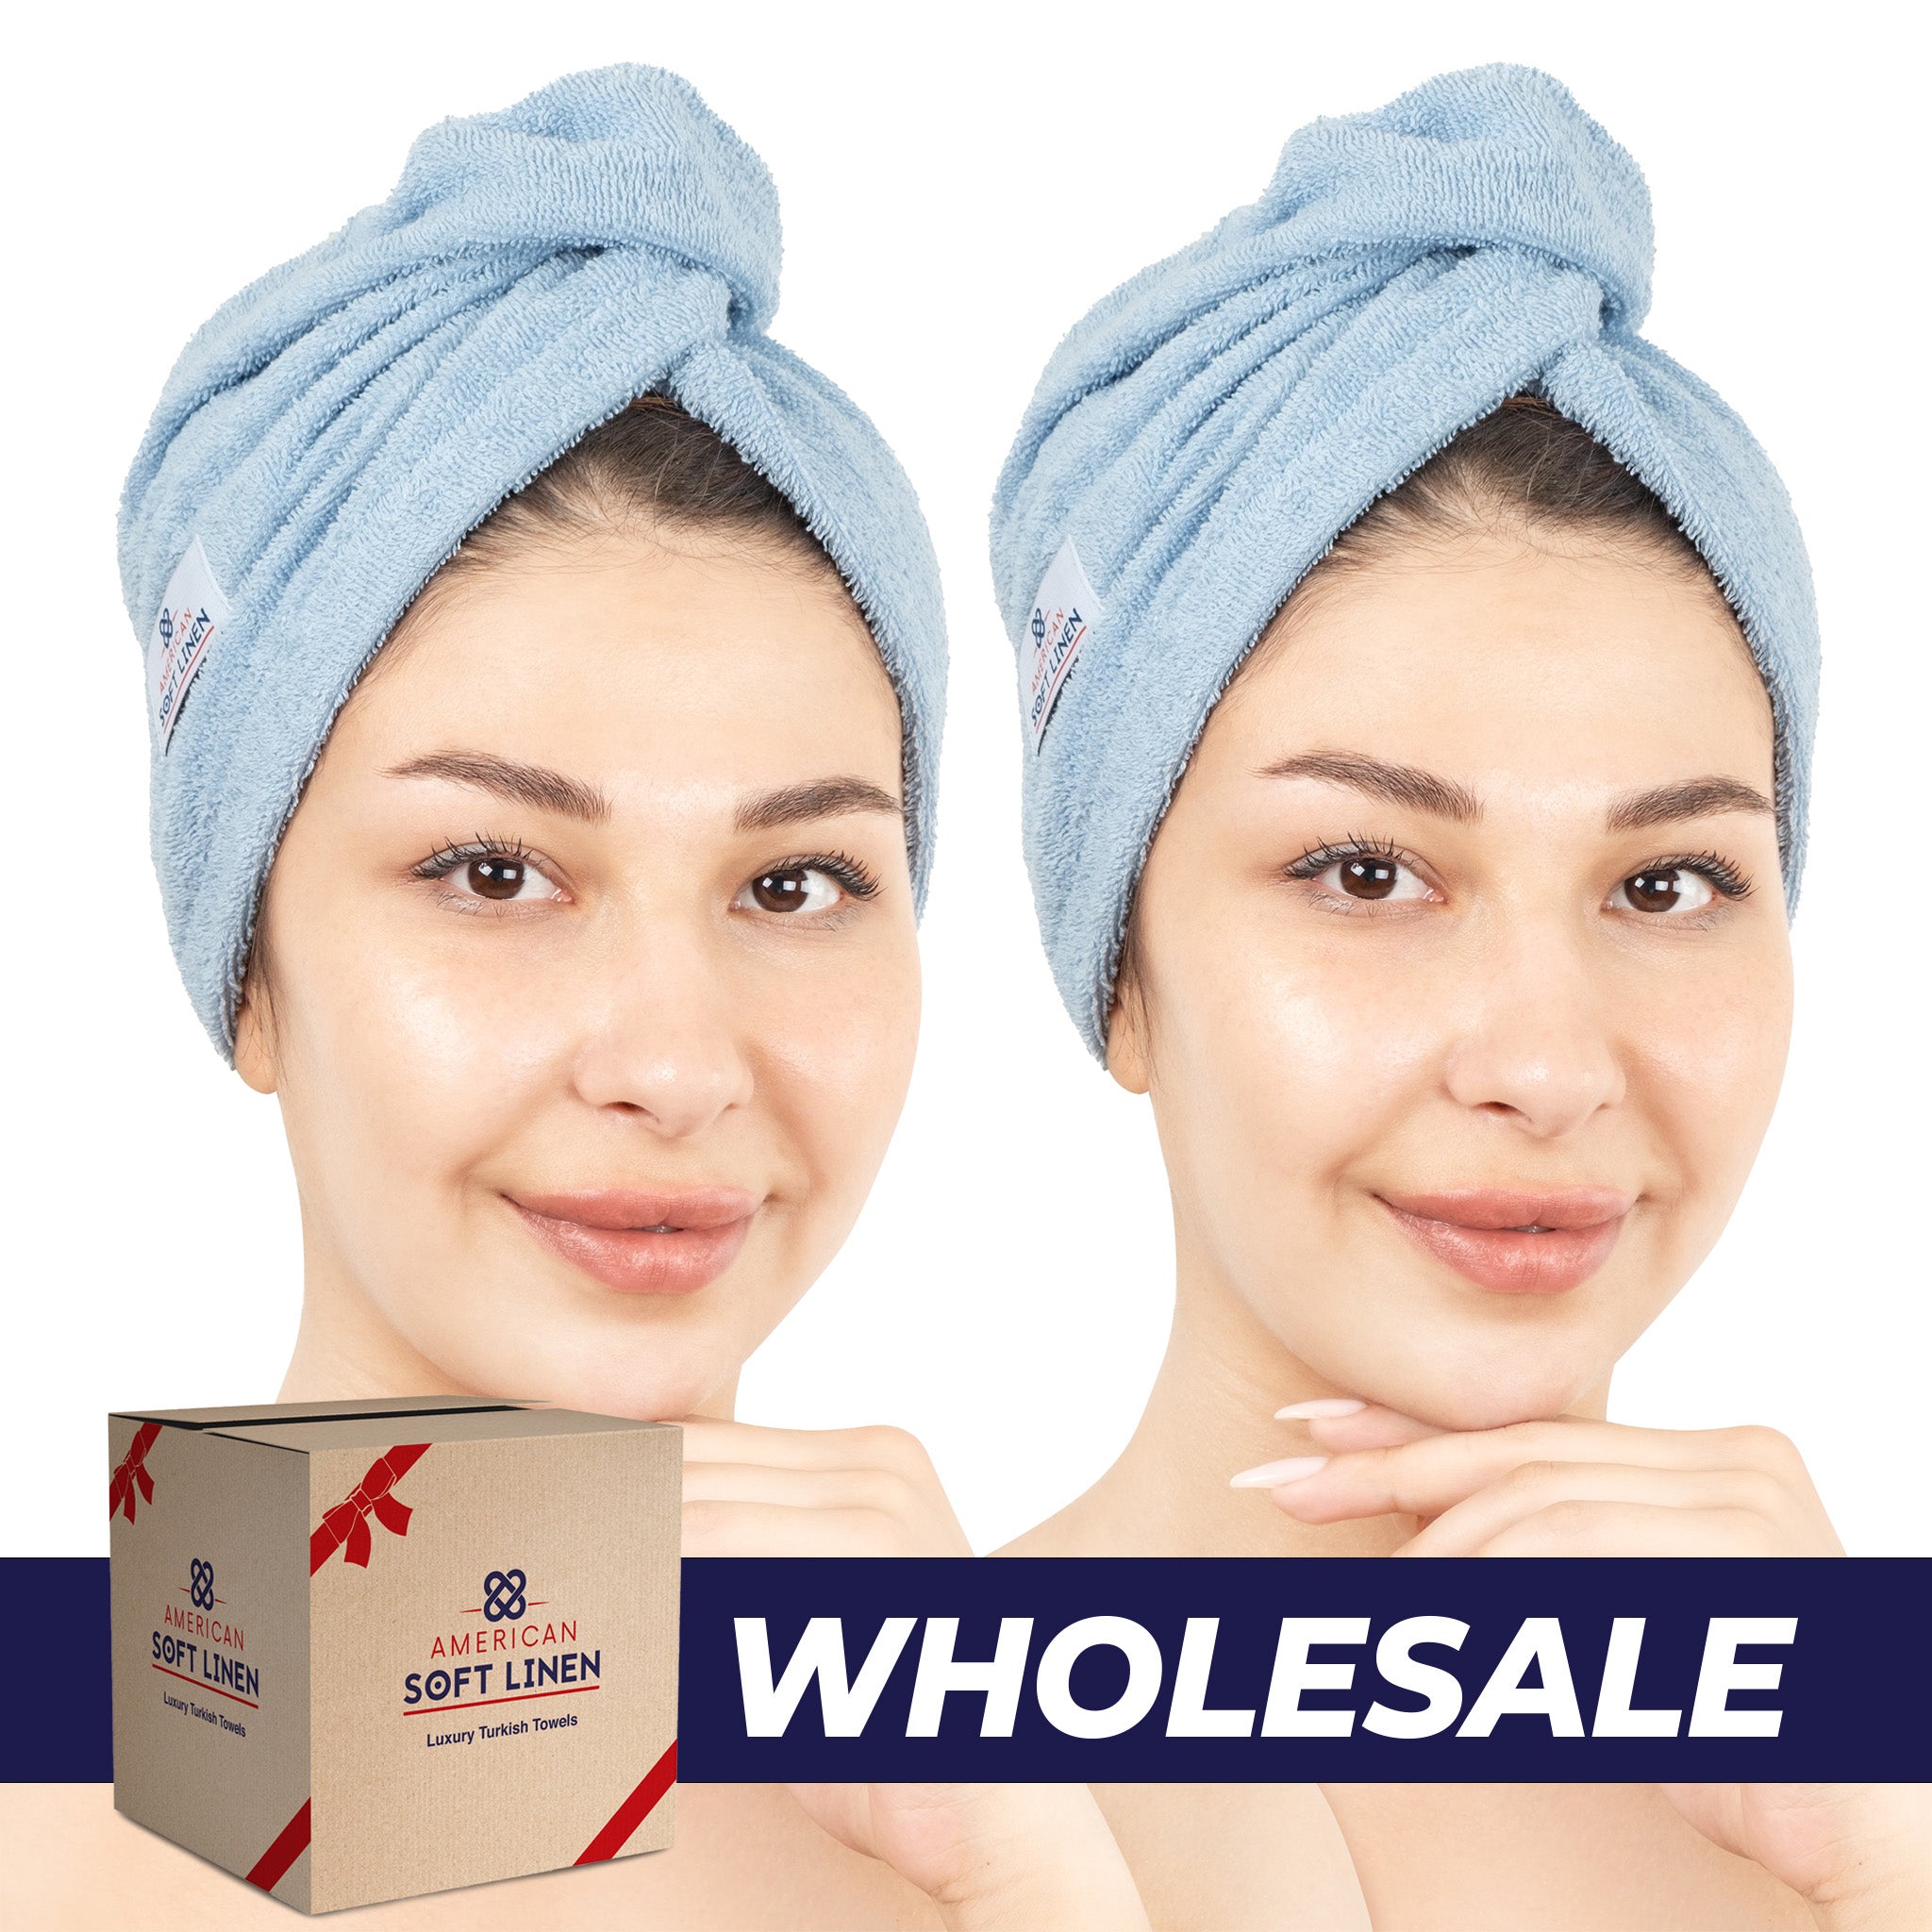 American Soft Linen 100% Cotton Hair Drying Towels for Women 2 pack 75 set case pack sky-blue-0